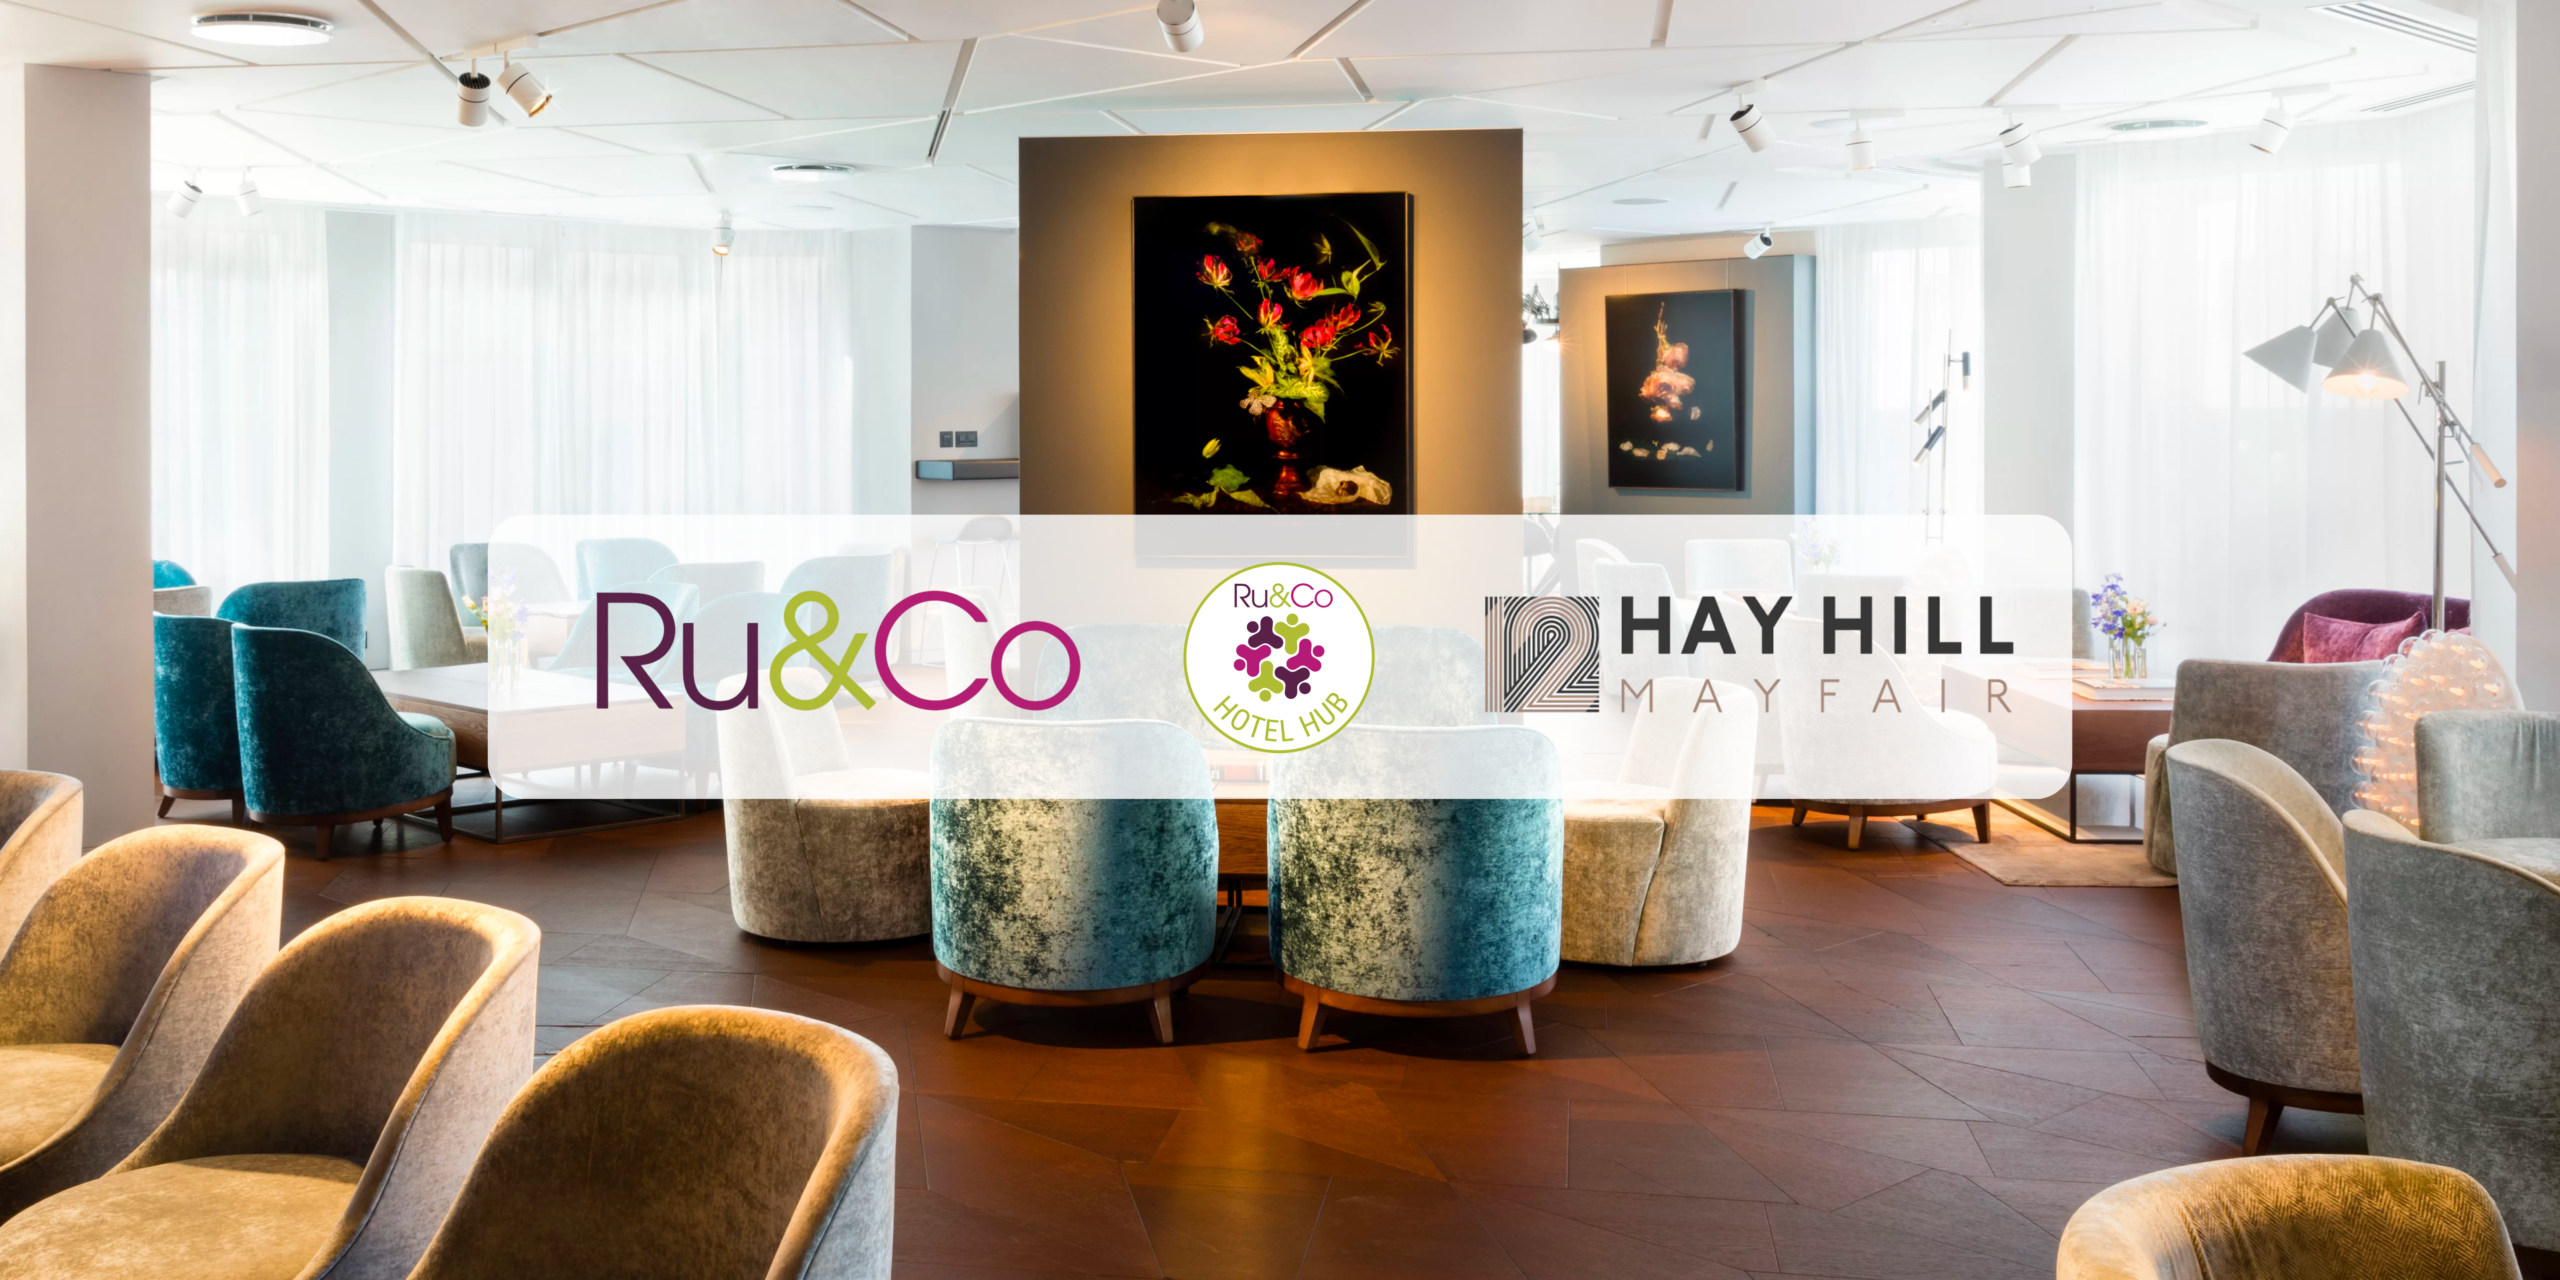 Ru&Co’s HotelHUB Networking Event at 12 Hay Hill